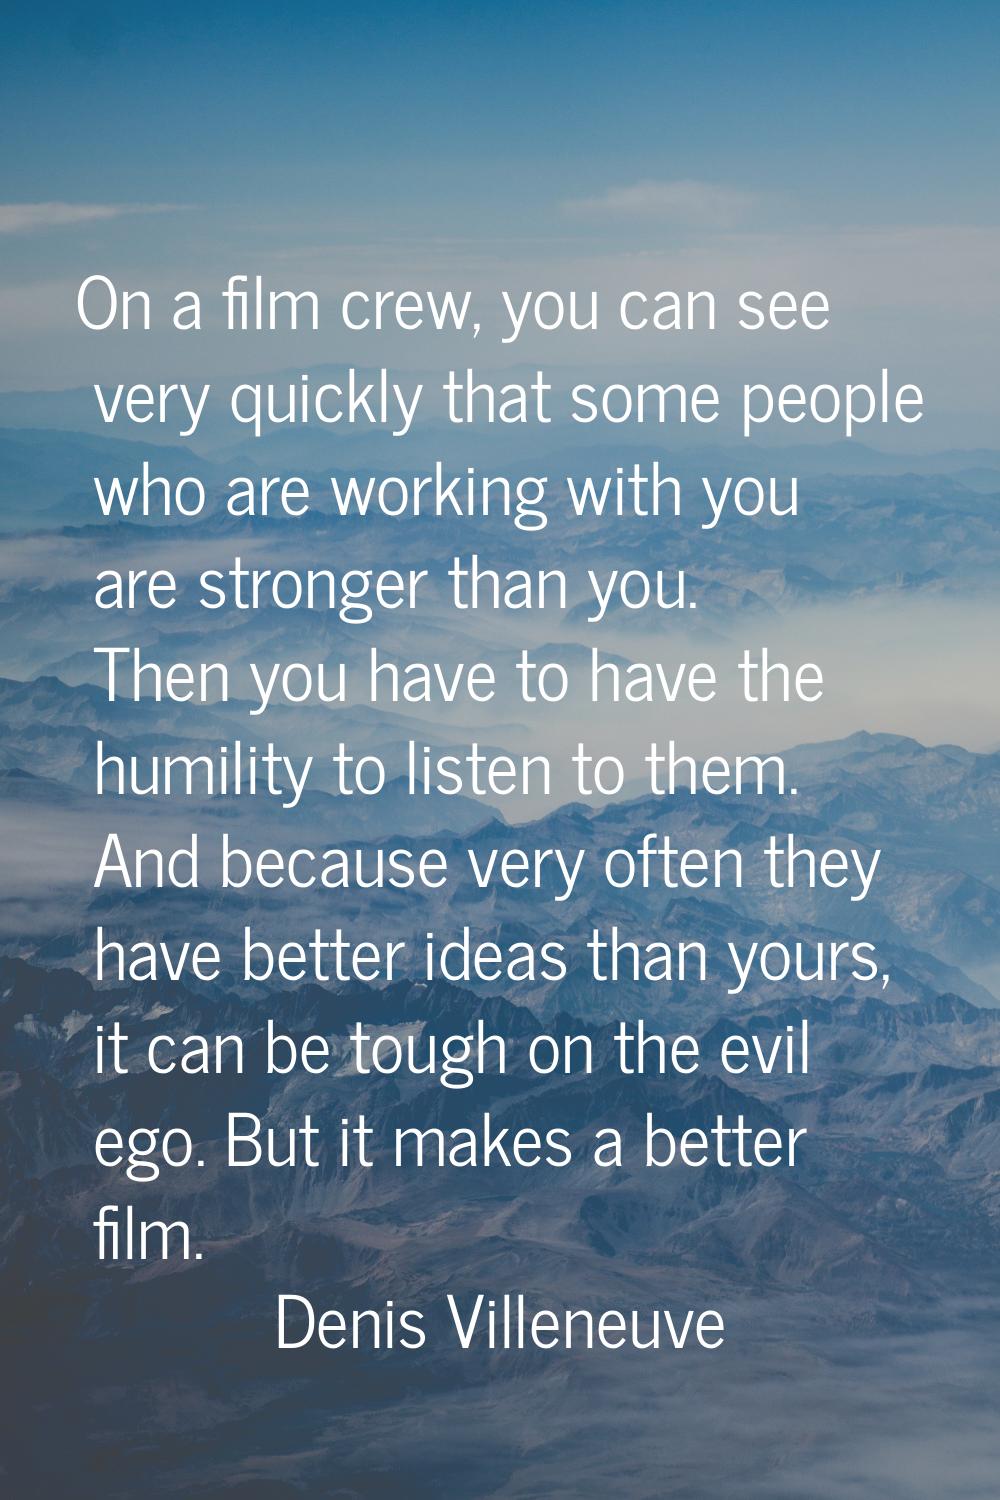 On a film crew, you can see very quickly that some people who are working with you are stronger tha